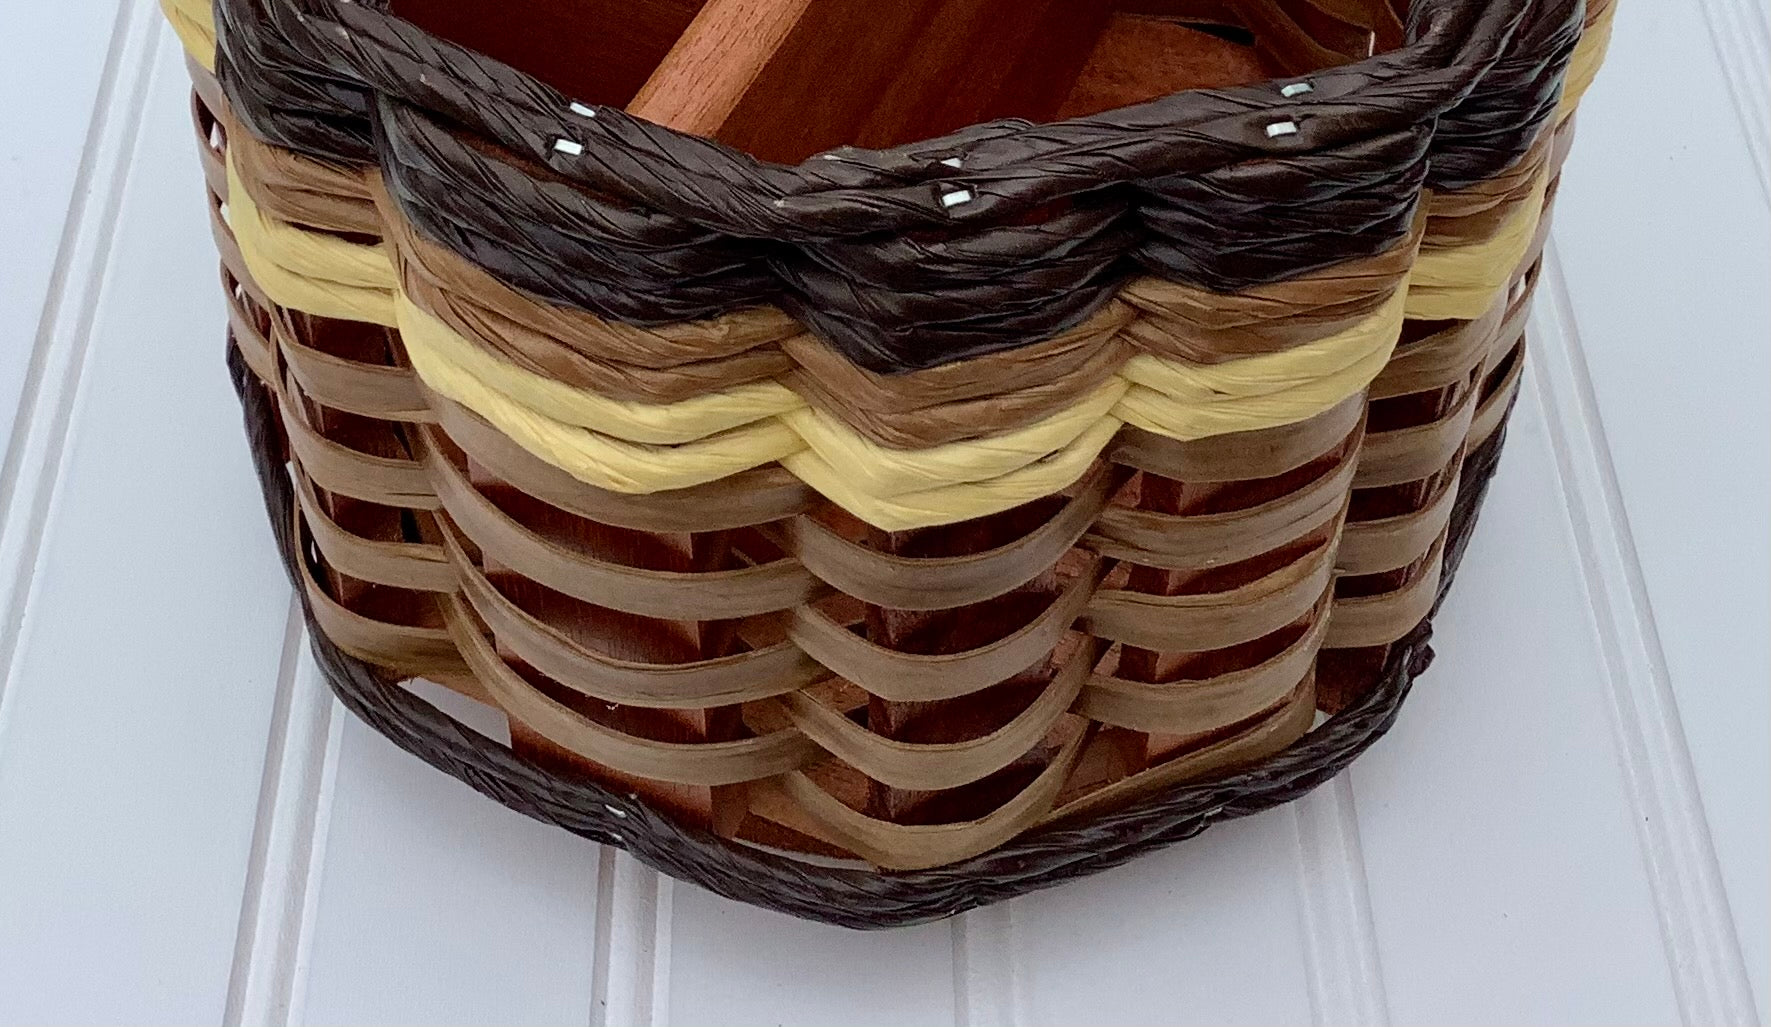 Double Bread and Pastry Basket